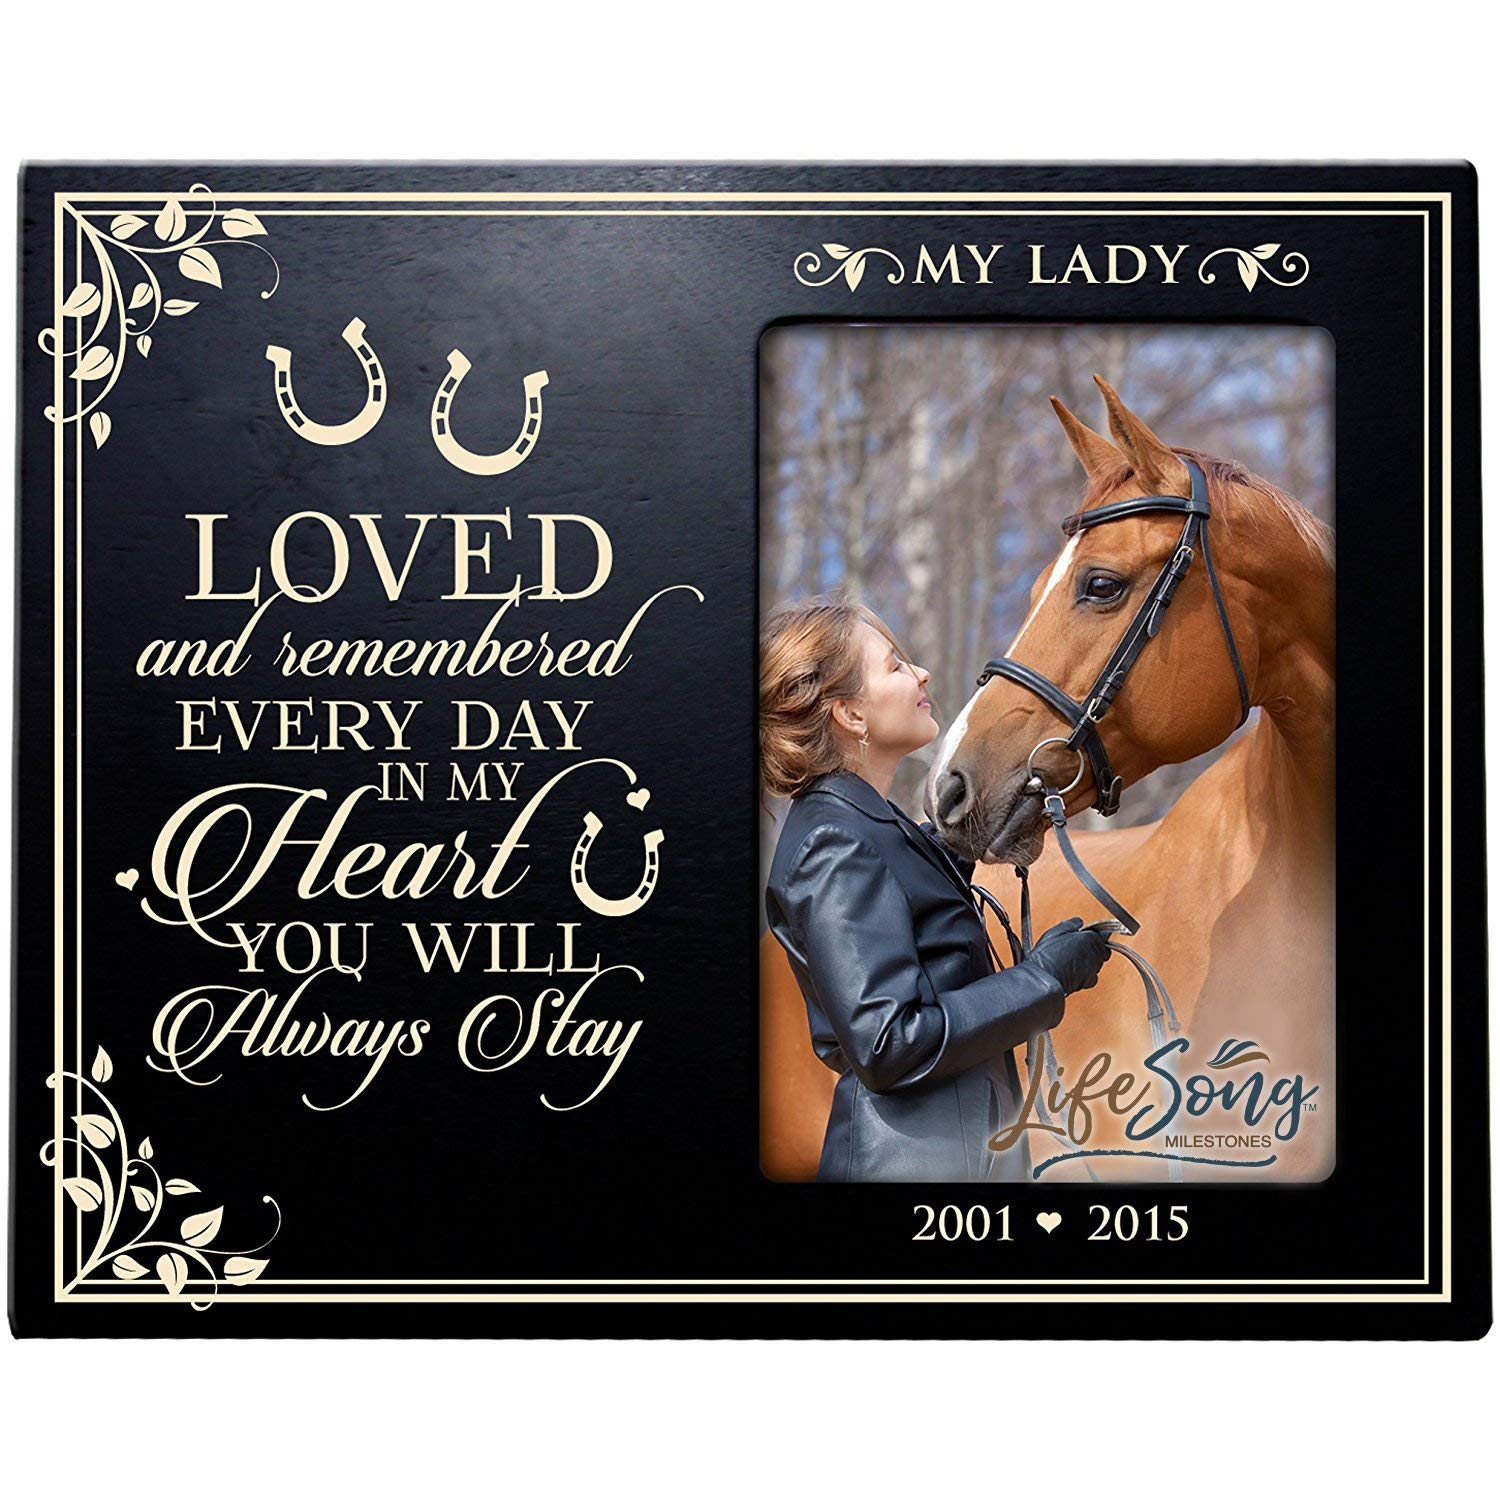 Custom Wooden Memorial 8x10 Picture Frame for Pet holds 4x6 photo Loved And Remembered - LifeSong Milestones